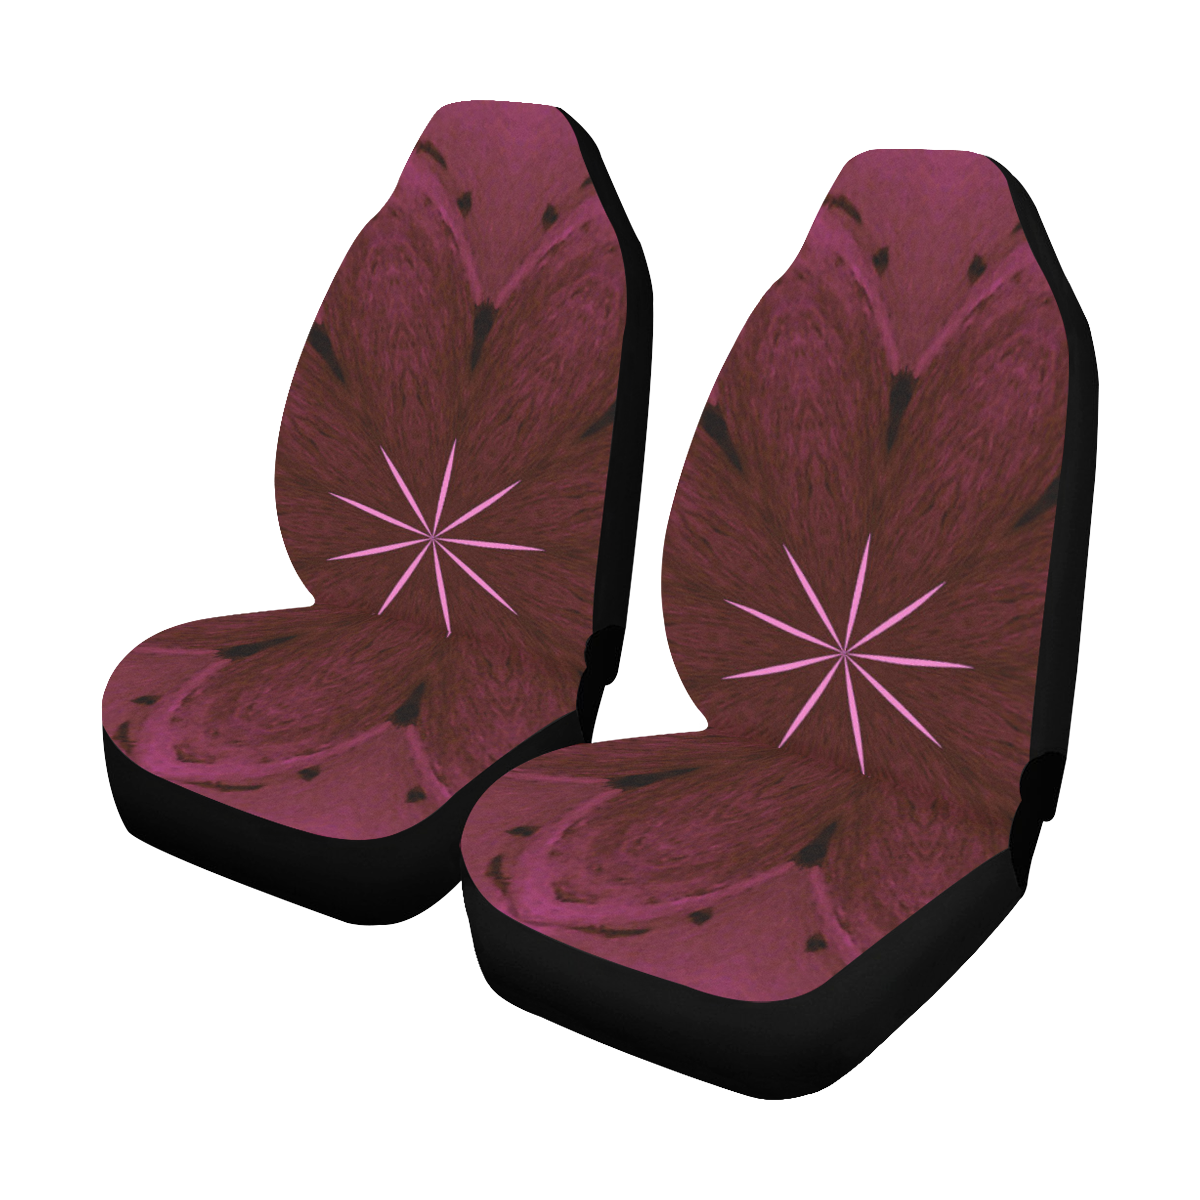 PWINK Car Seat Covers (Set of 2)